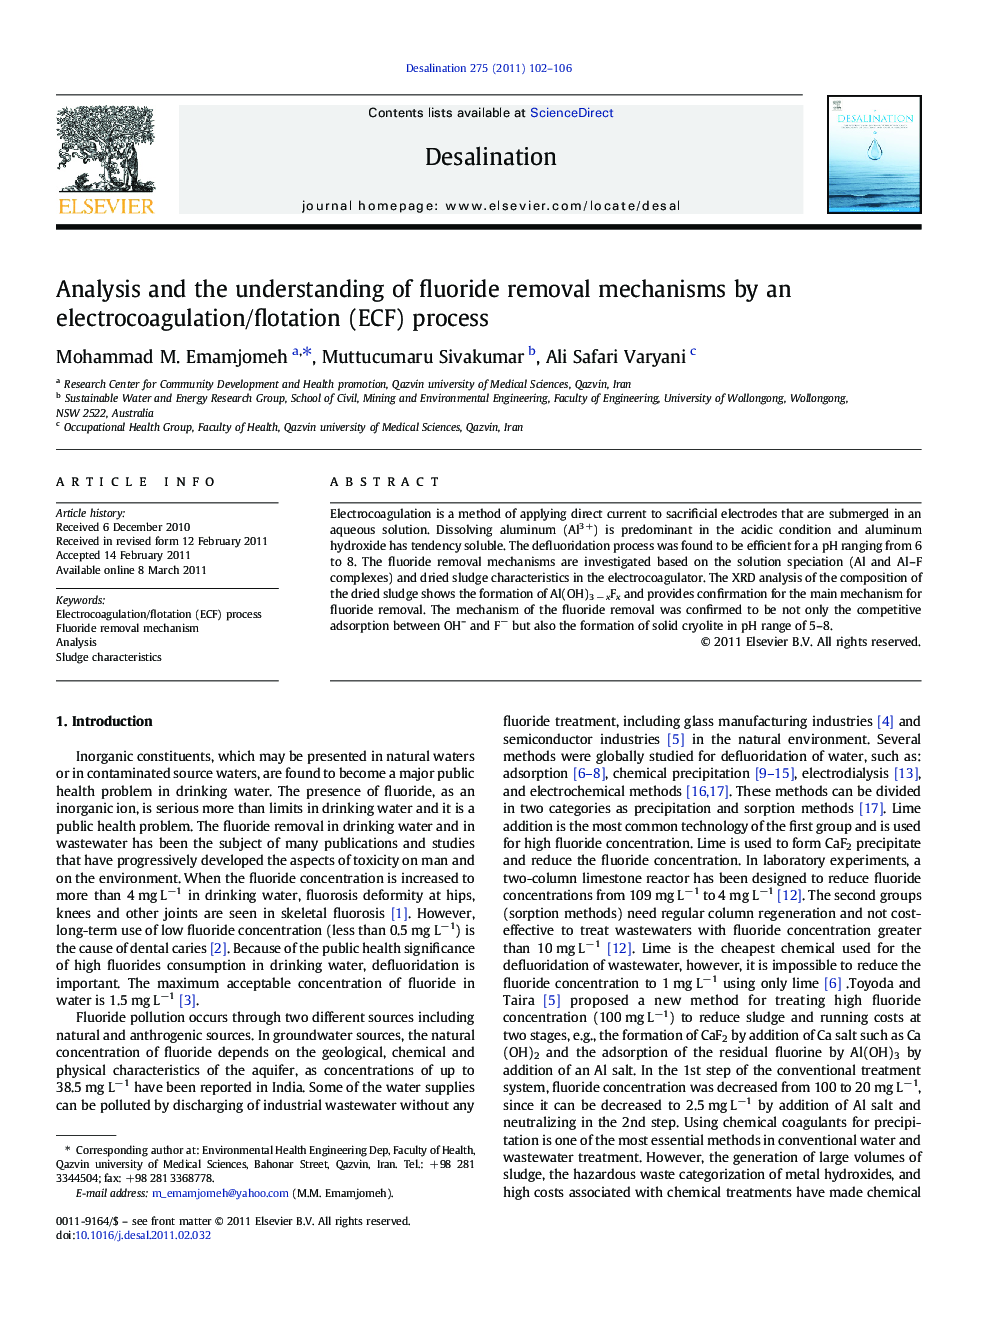 Analysis and the understanding of fluoride removal mechanisms by an electrocoagulation/flotation (ECF) process